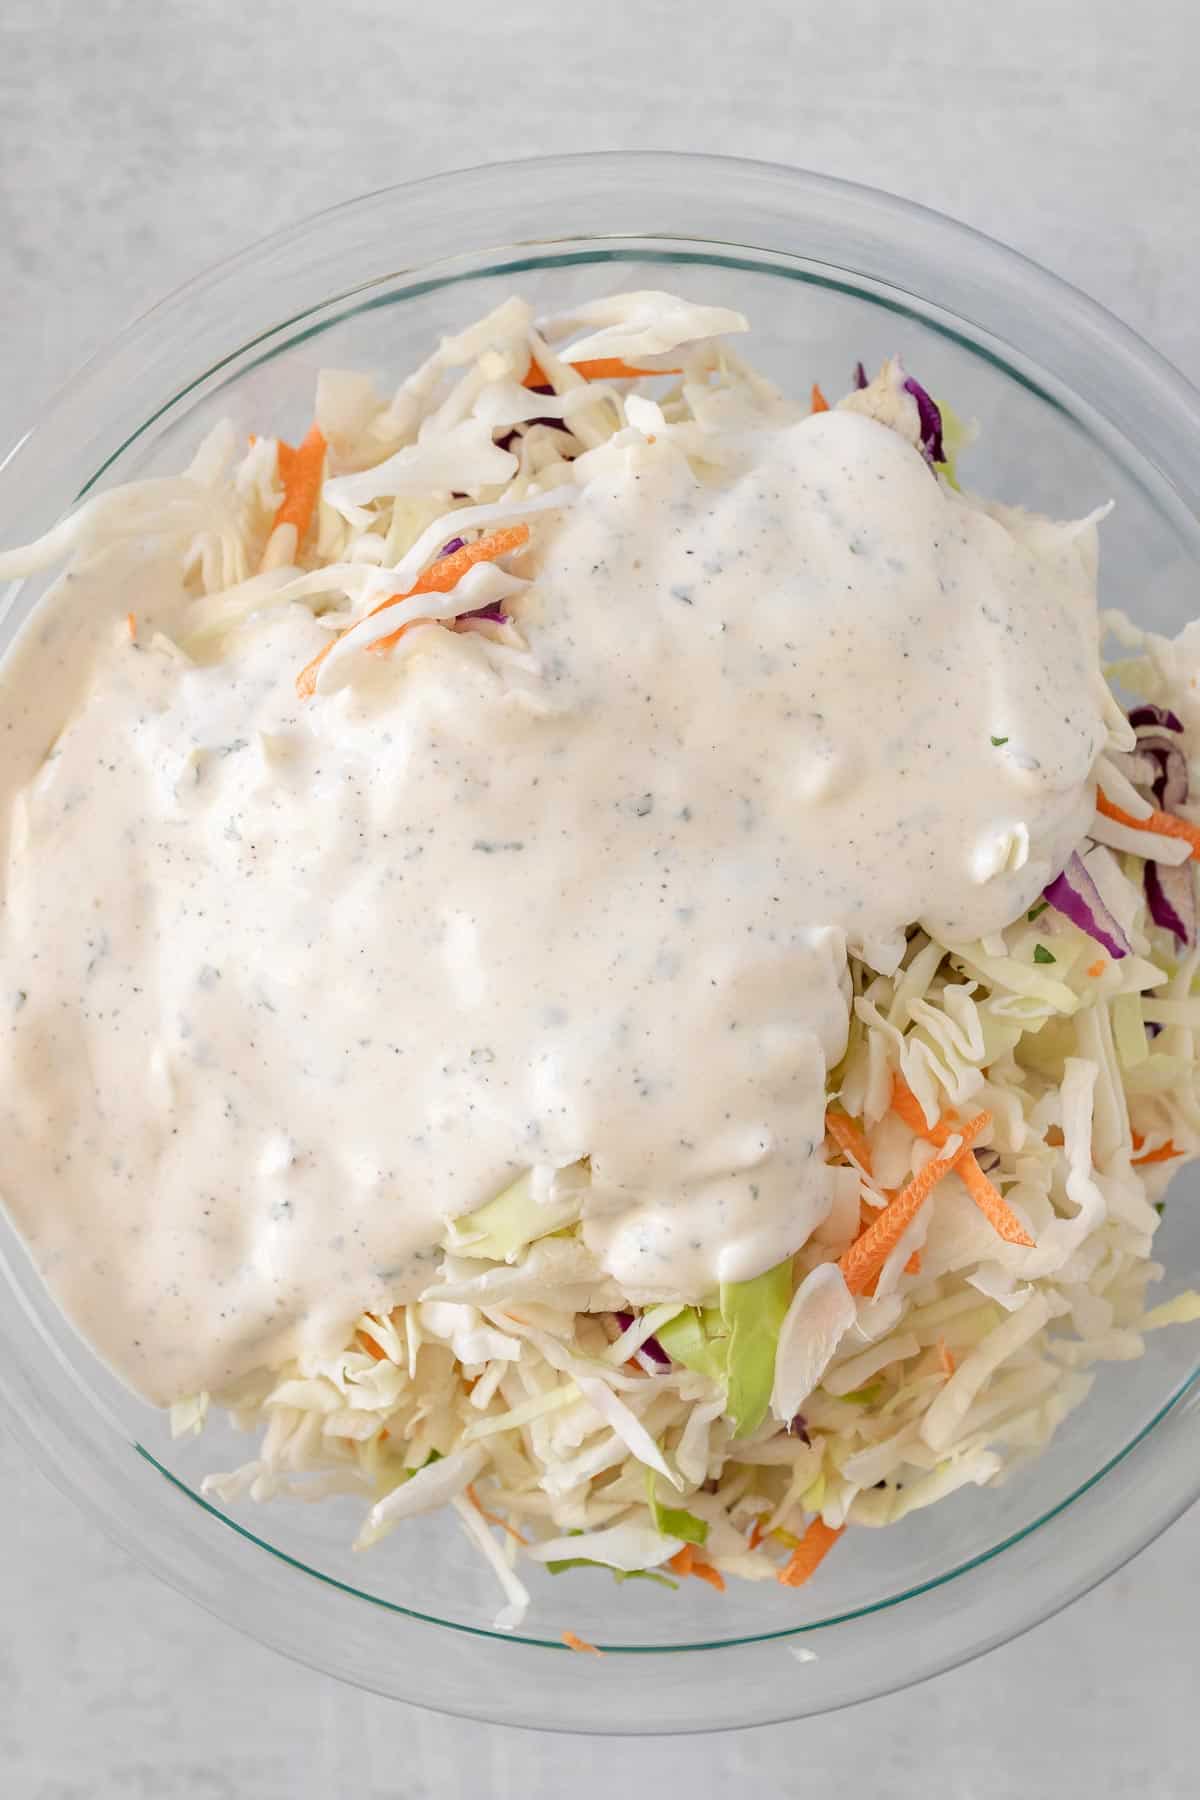 Sauce poured over the coleslaw mixture in a large glass bowl, as seen from above